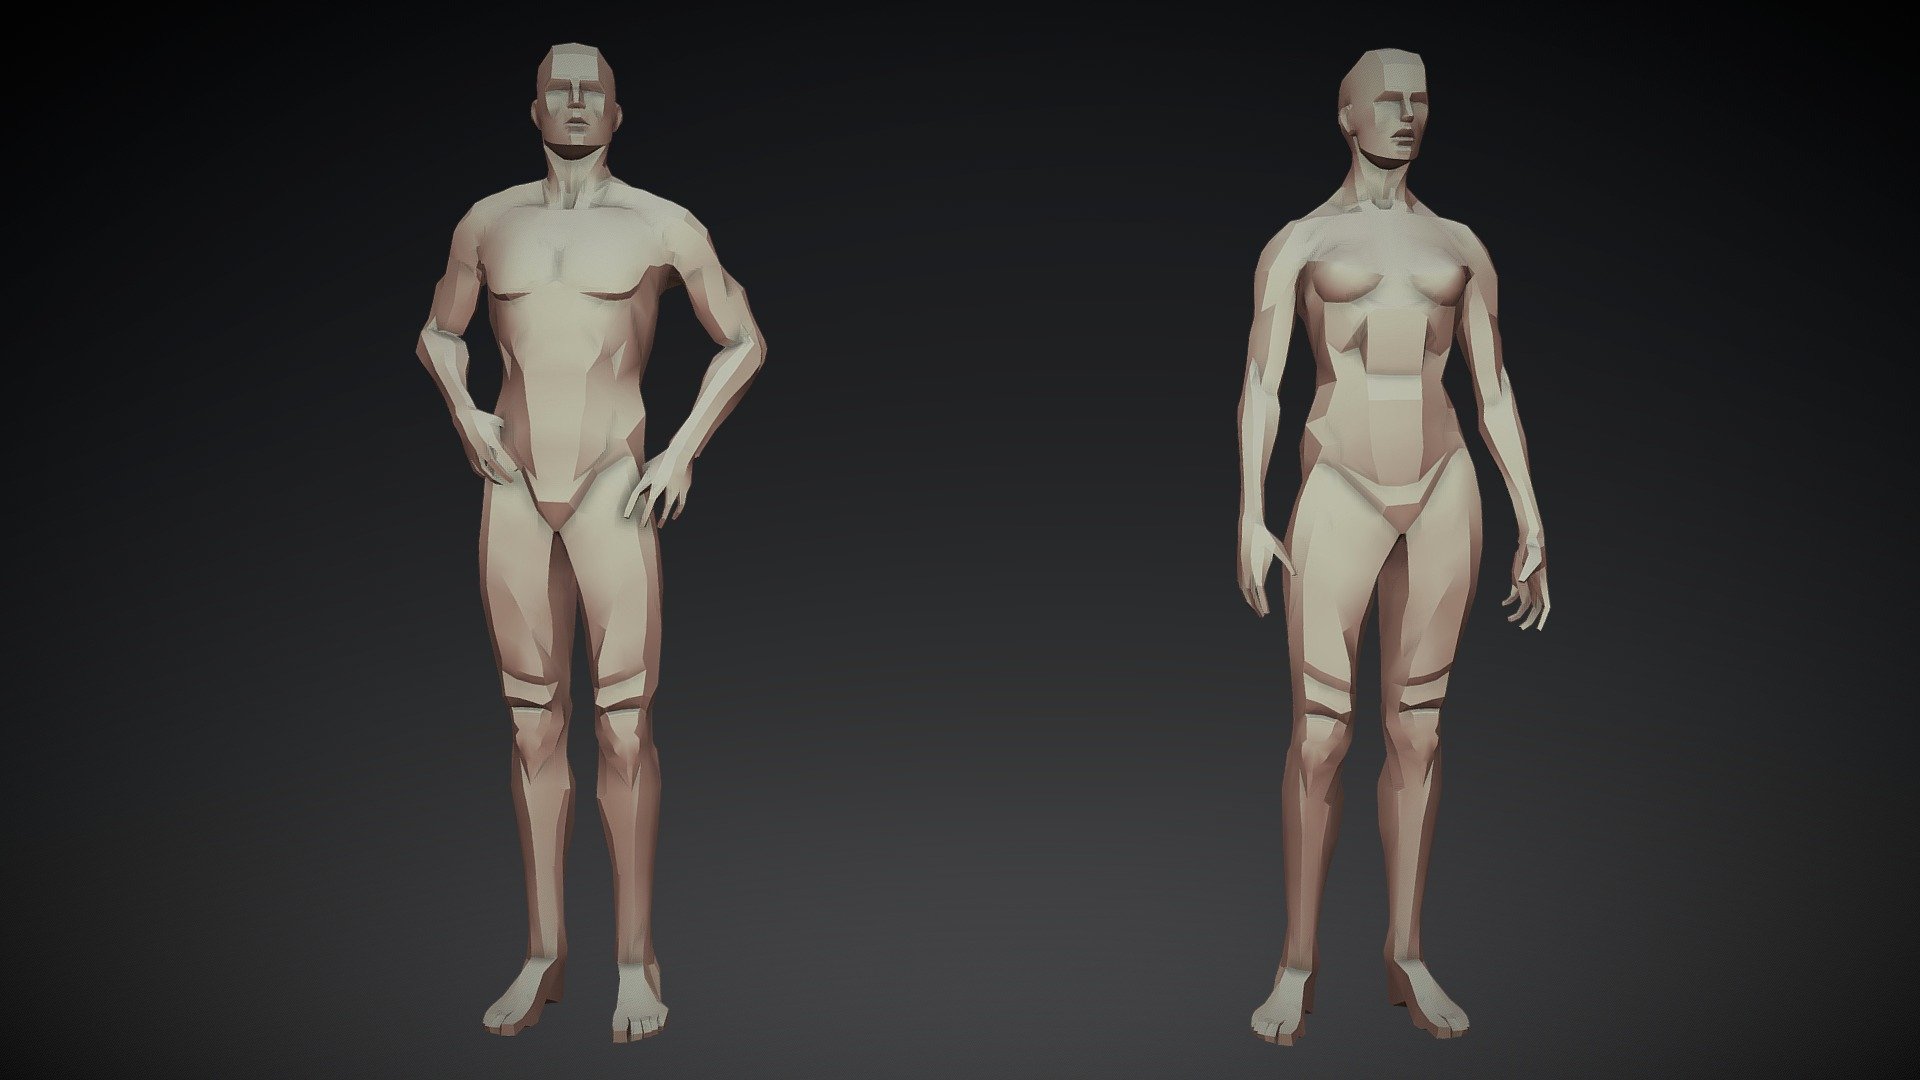 Painkiller claw iron PLANAR HUMAN BASE RIGS - Download Free 3D model by dacancino (@dacancino)  [15a1d67]